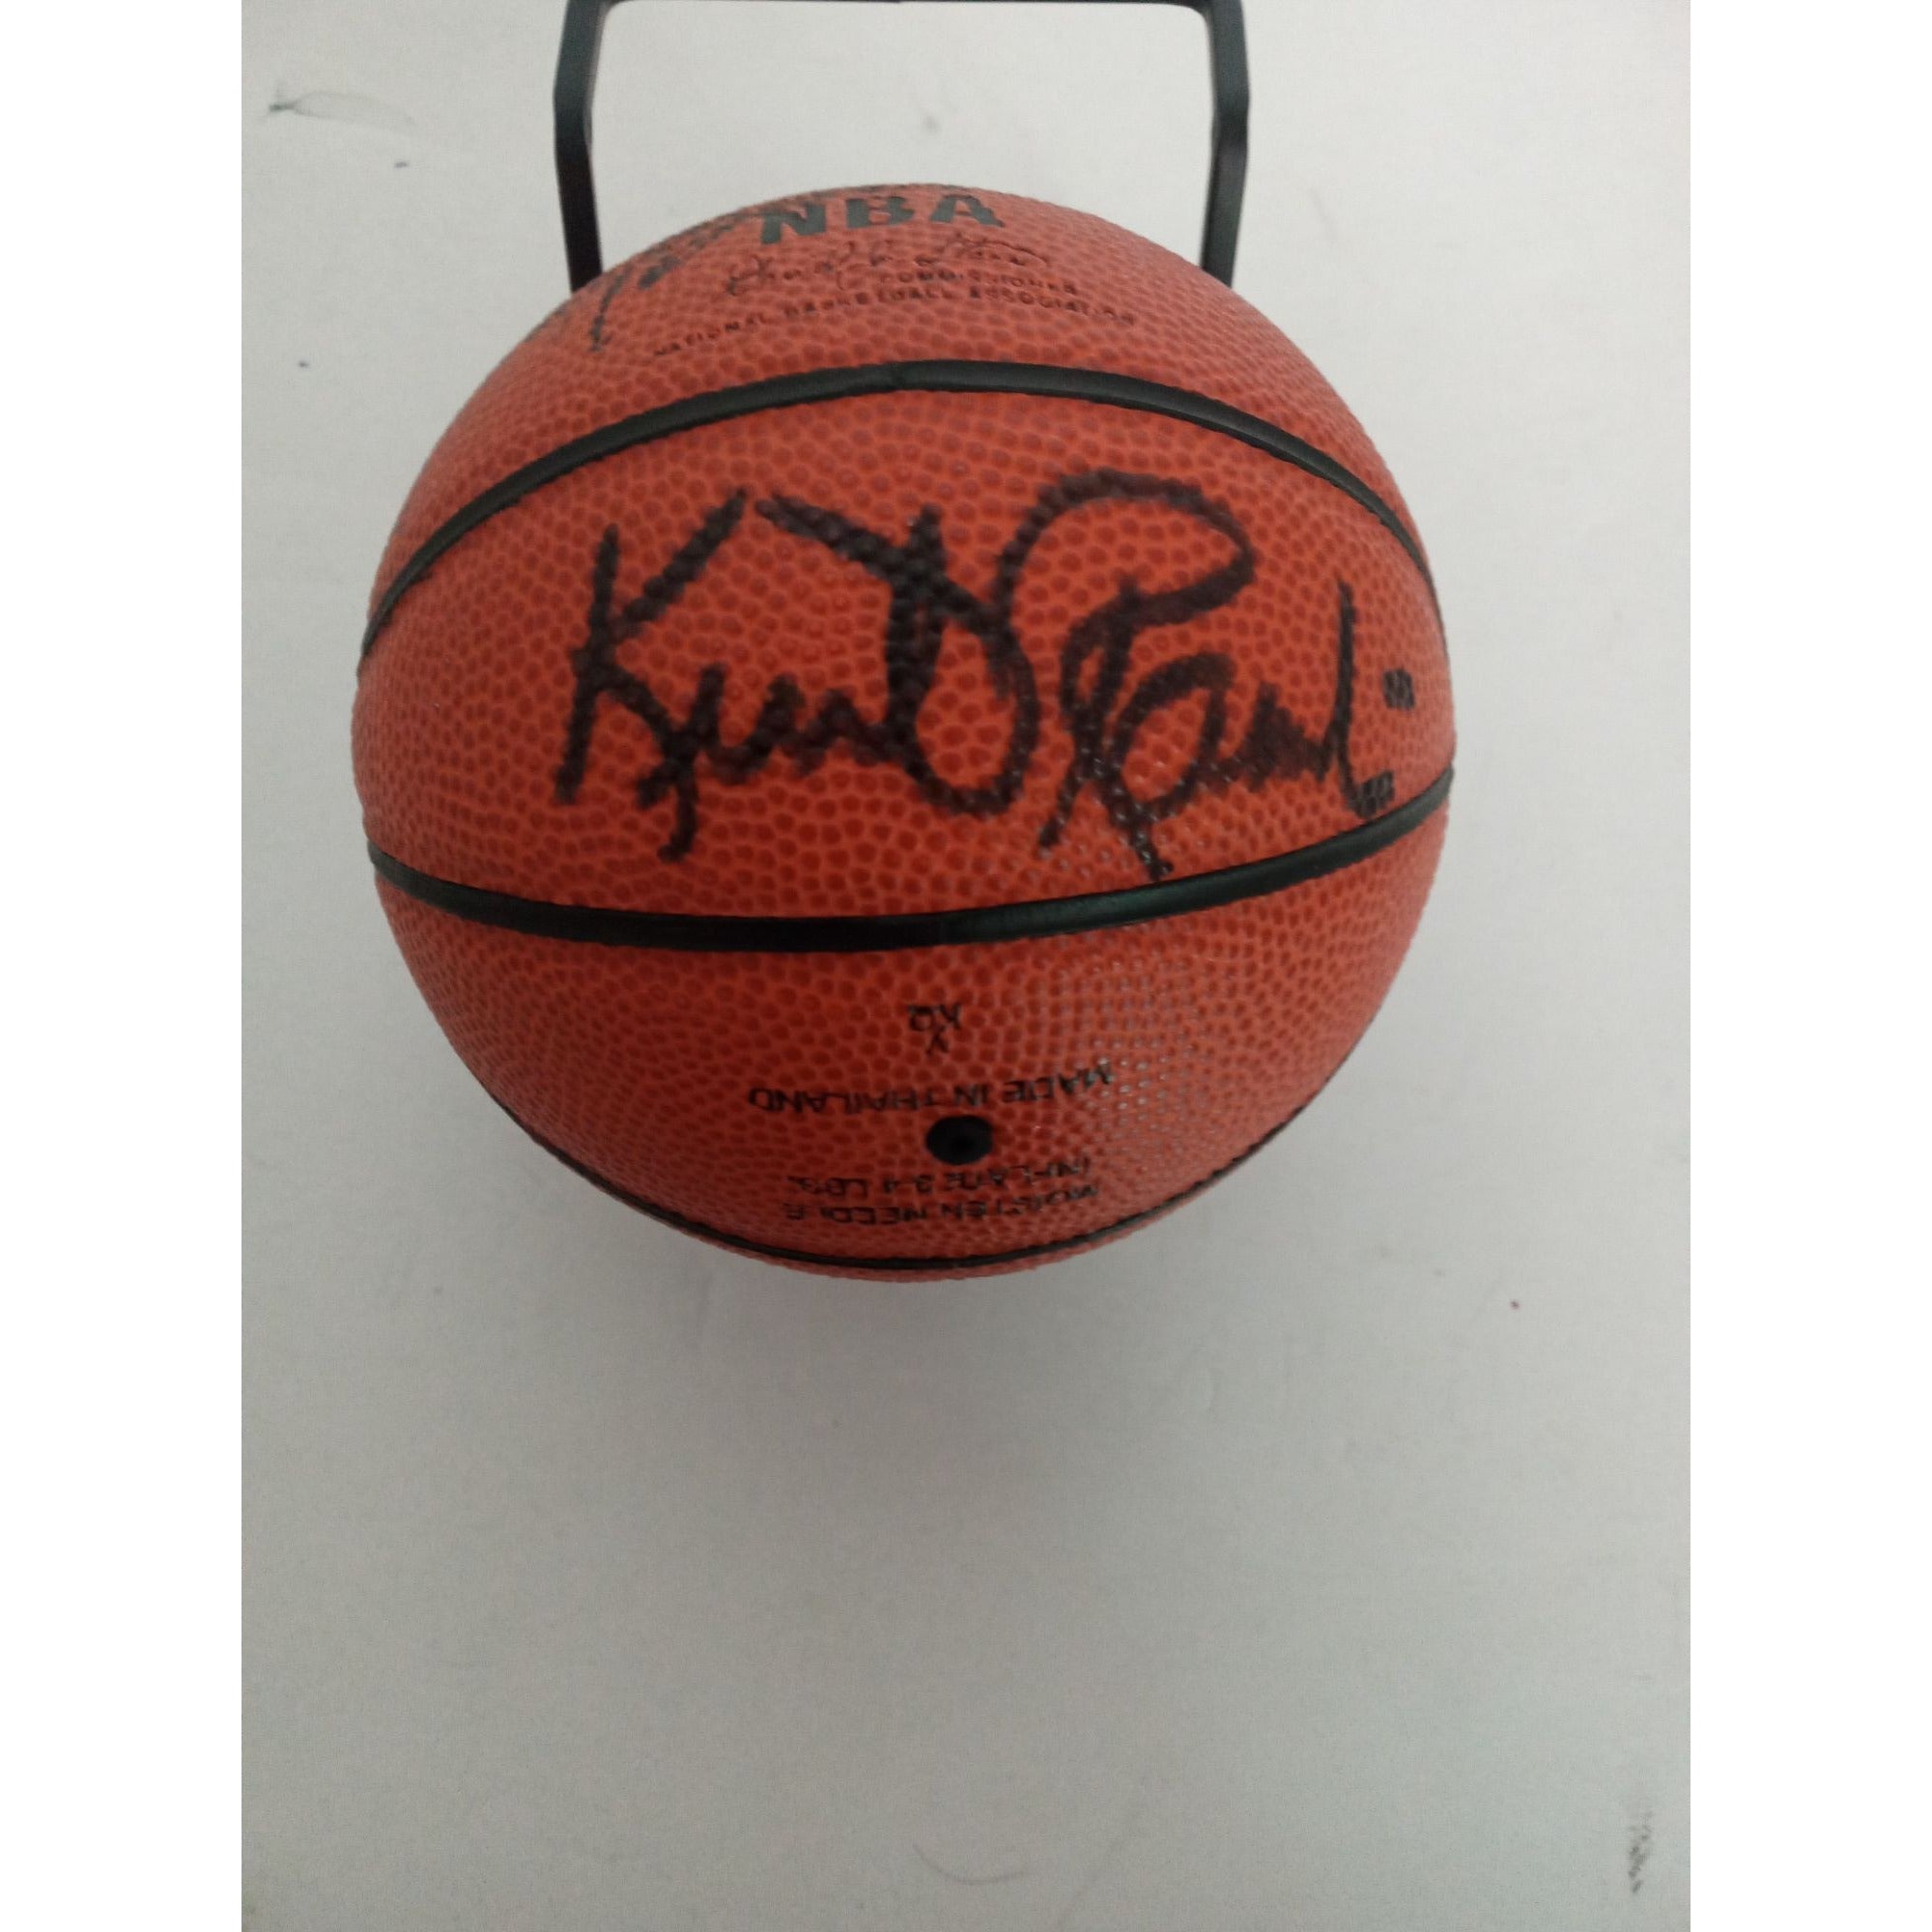 Kobe Bryant Jerry Buss Phil Jackson Shaquille O'Neal mini basketball signed with proof